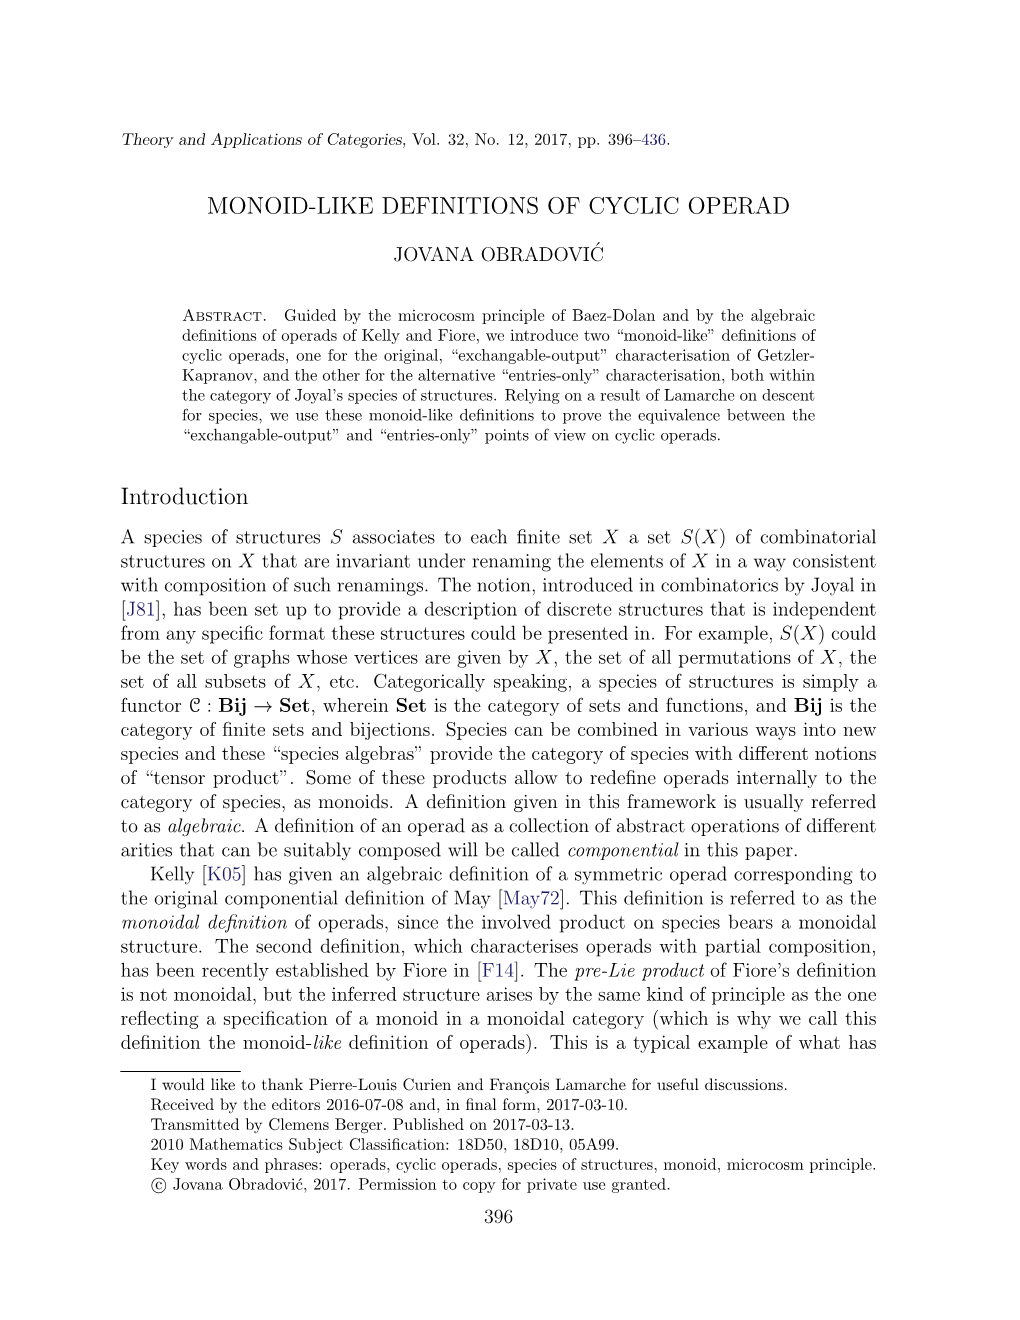 MONOID-LIKE DEFINITIONS of CYCLIC OPERAD Introduction